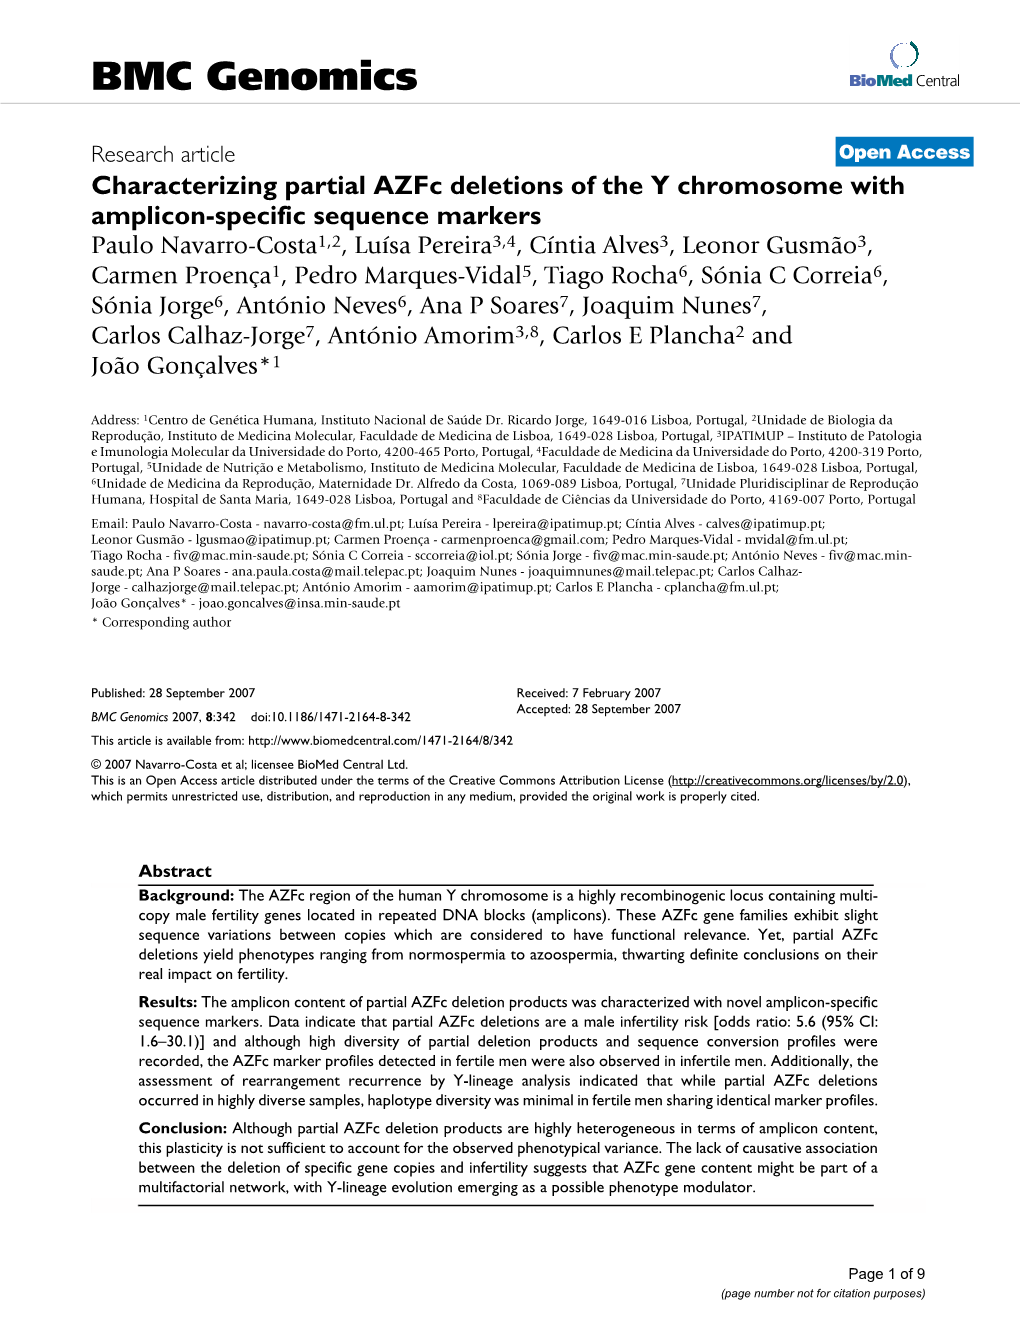 Characterizing Partial Azfc Deletions of the Y Chromosome with Amplicon